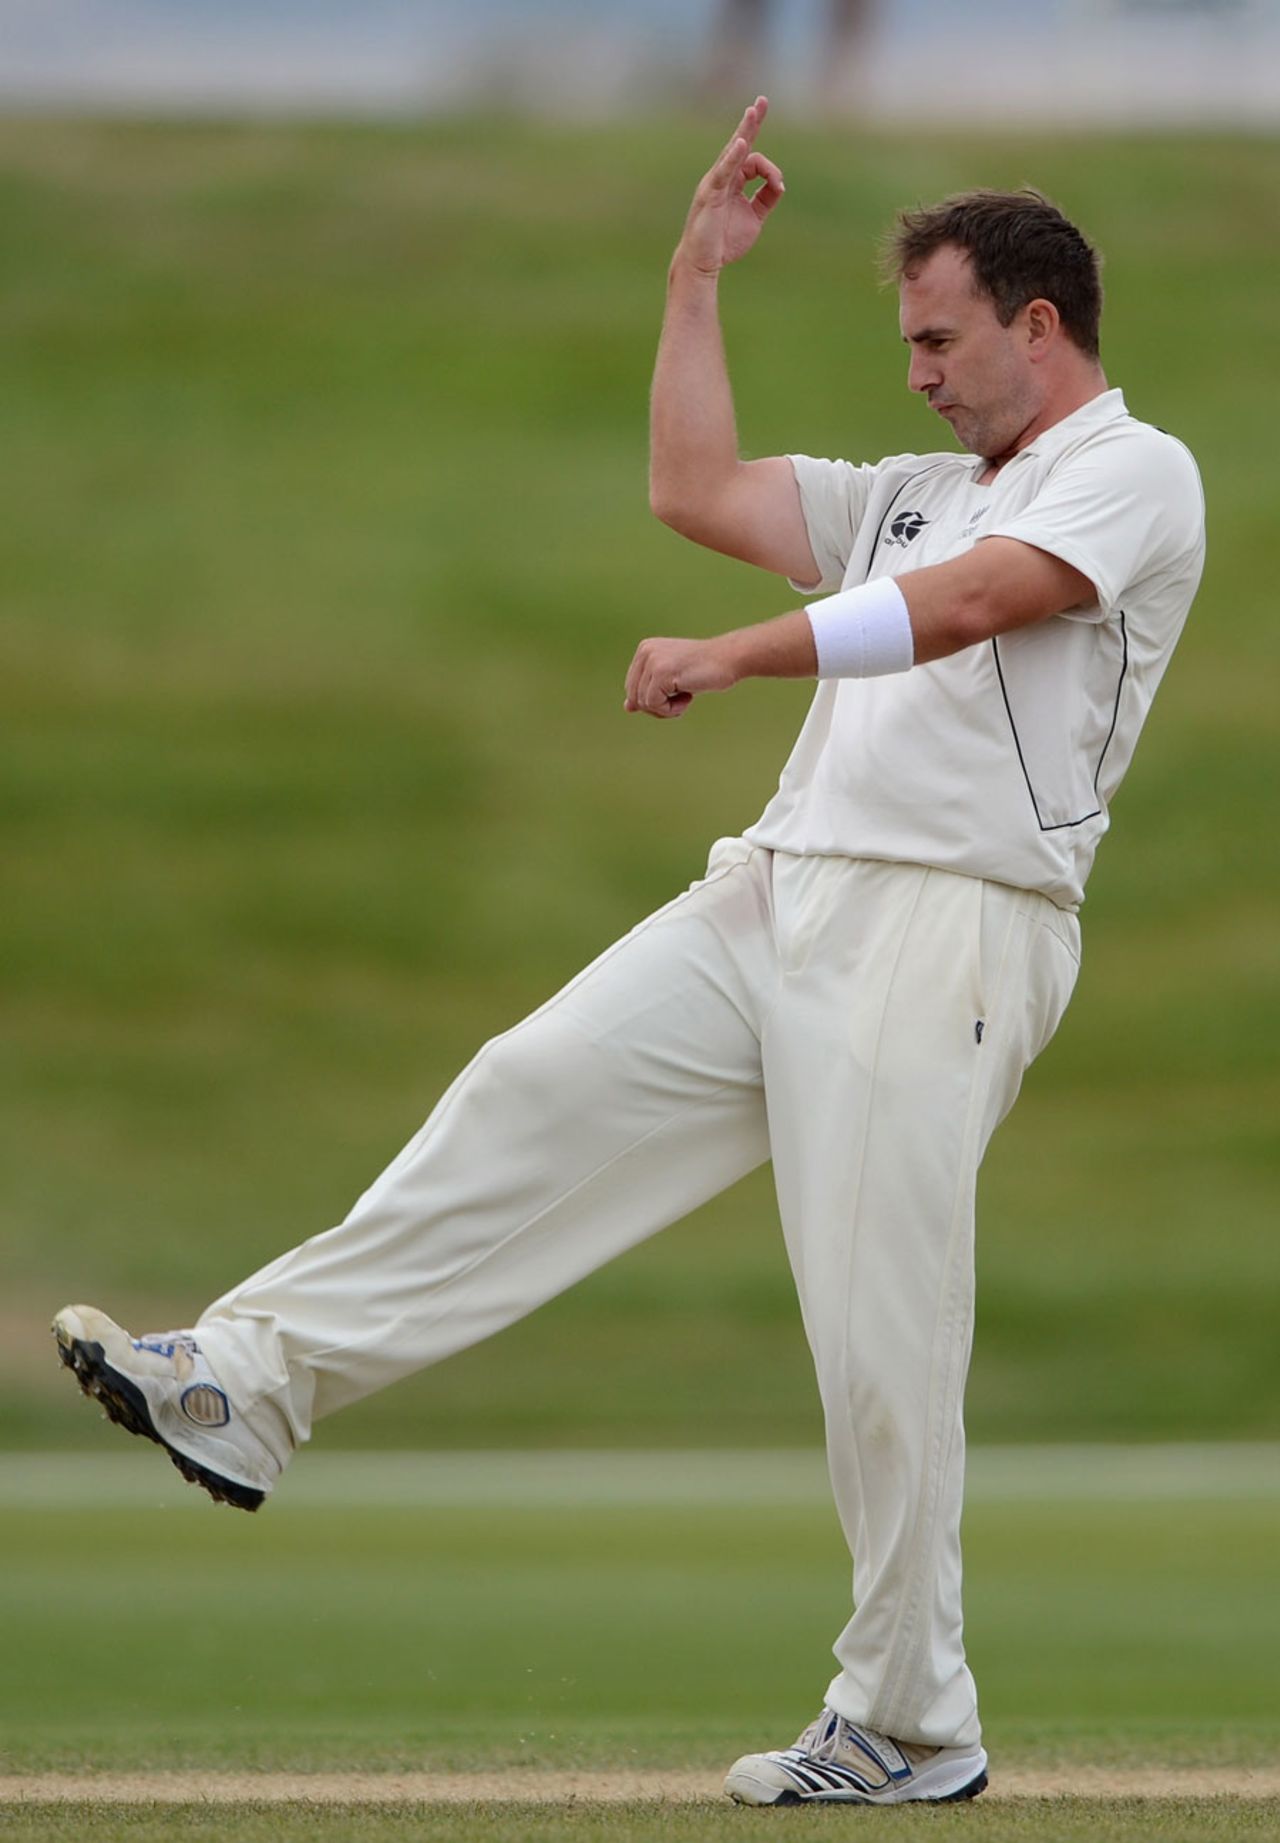 Mark Gillespie celebrates a wicket, New Zealand XI v England XI tour game, Queenstown, 3rd day, March 1, 2013